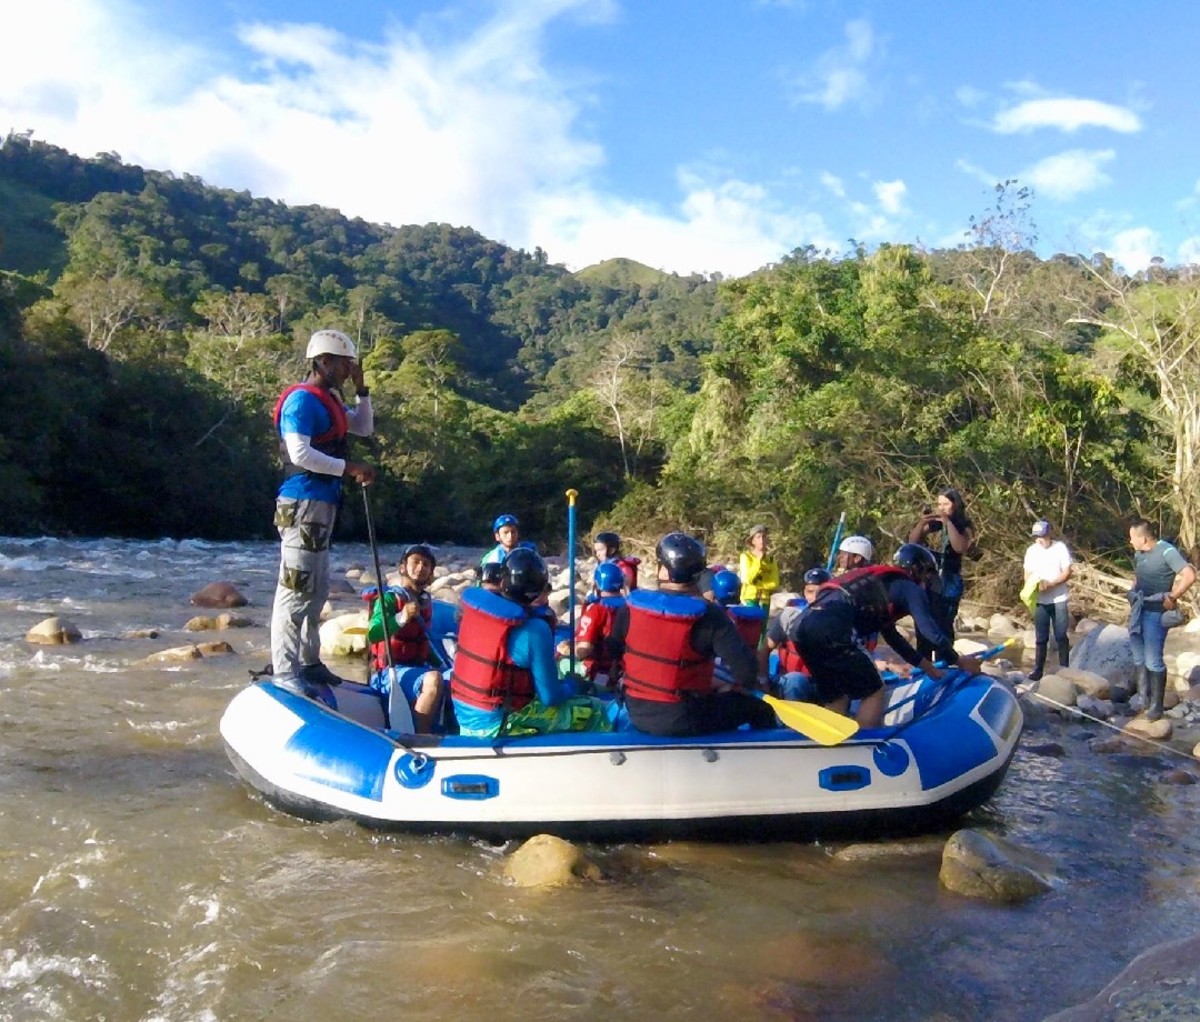 Group of rafters sitting in a boat on a river in Colombia.